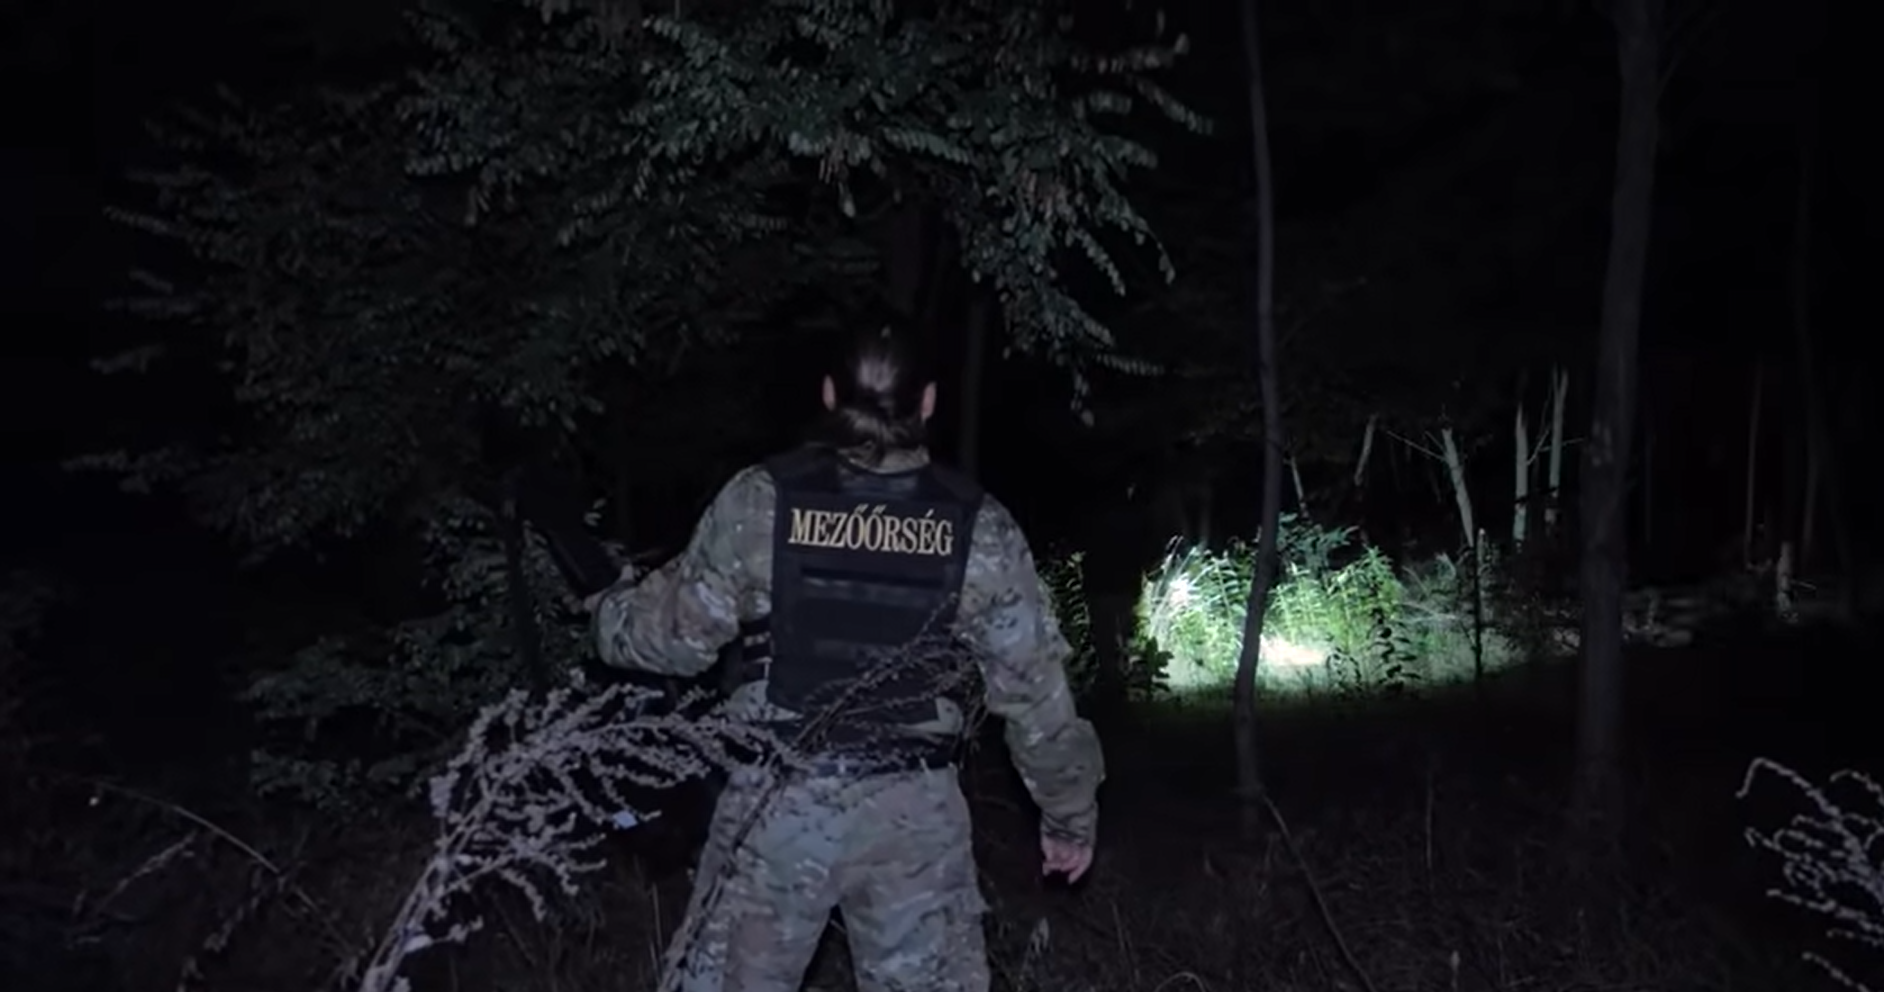 “Field Guards” at Southern Border Were to Be Investigated, Now They Receive State Support